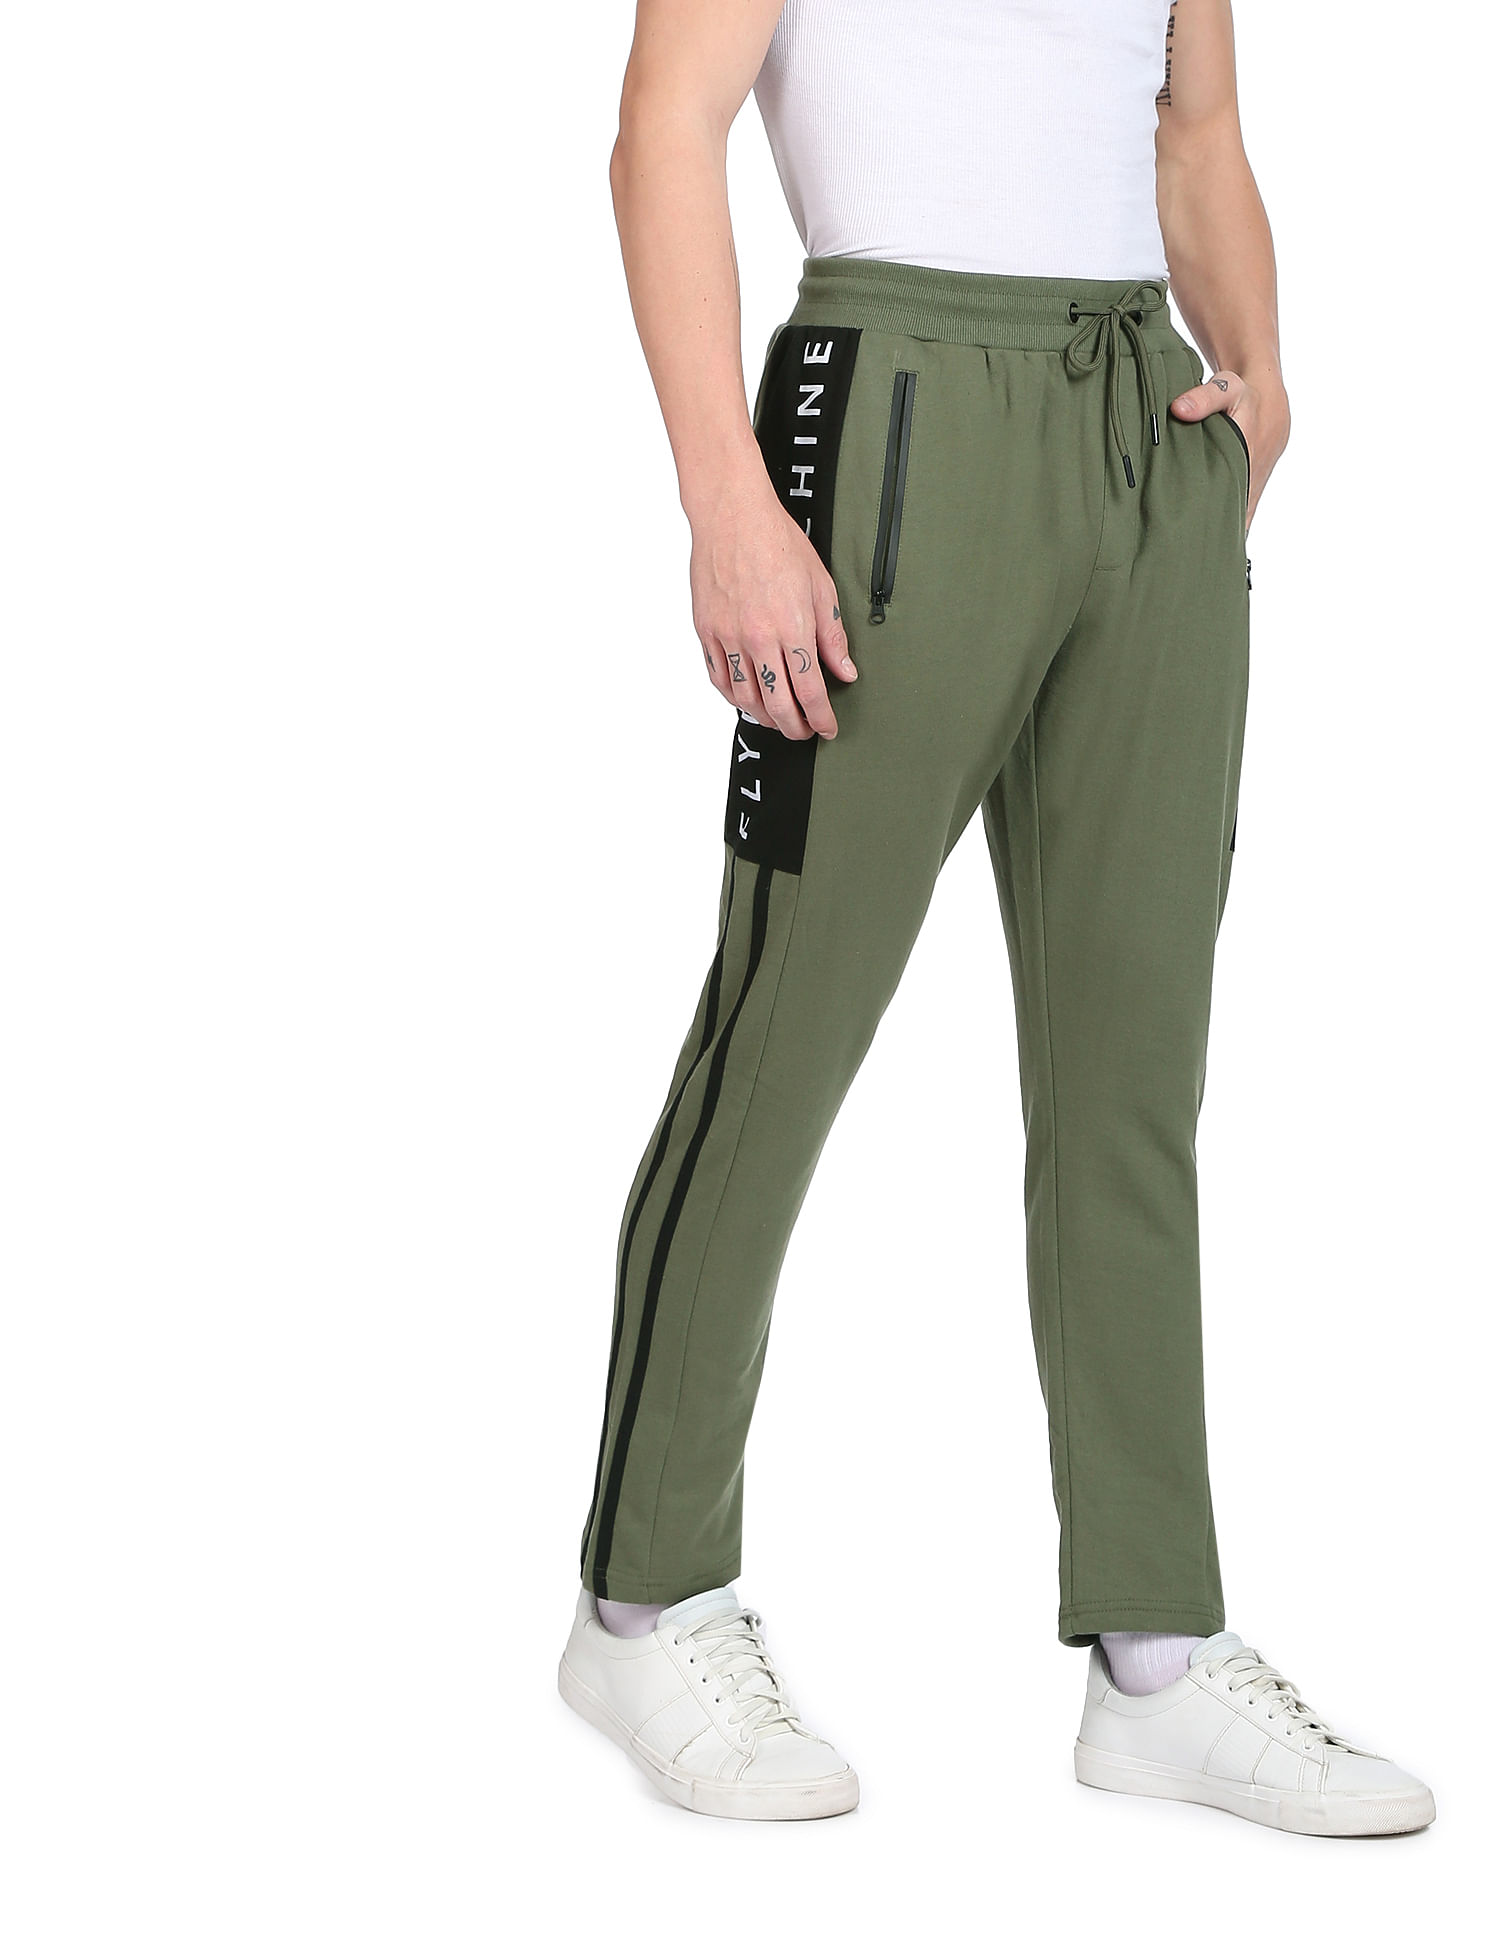 Cotton Trousers For Men Brand Clothing – Yusen and Miller Distribution  Services